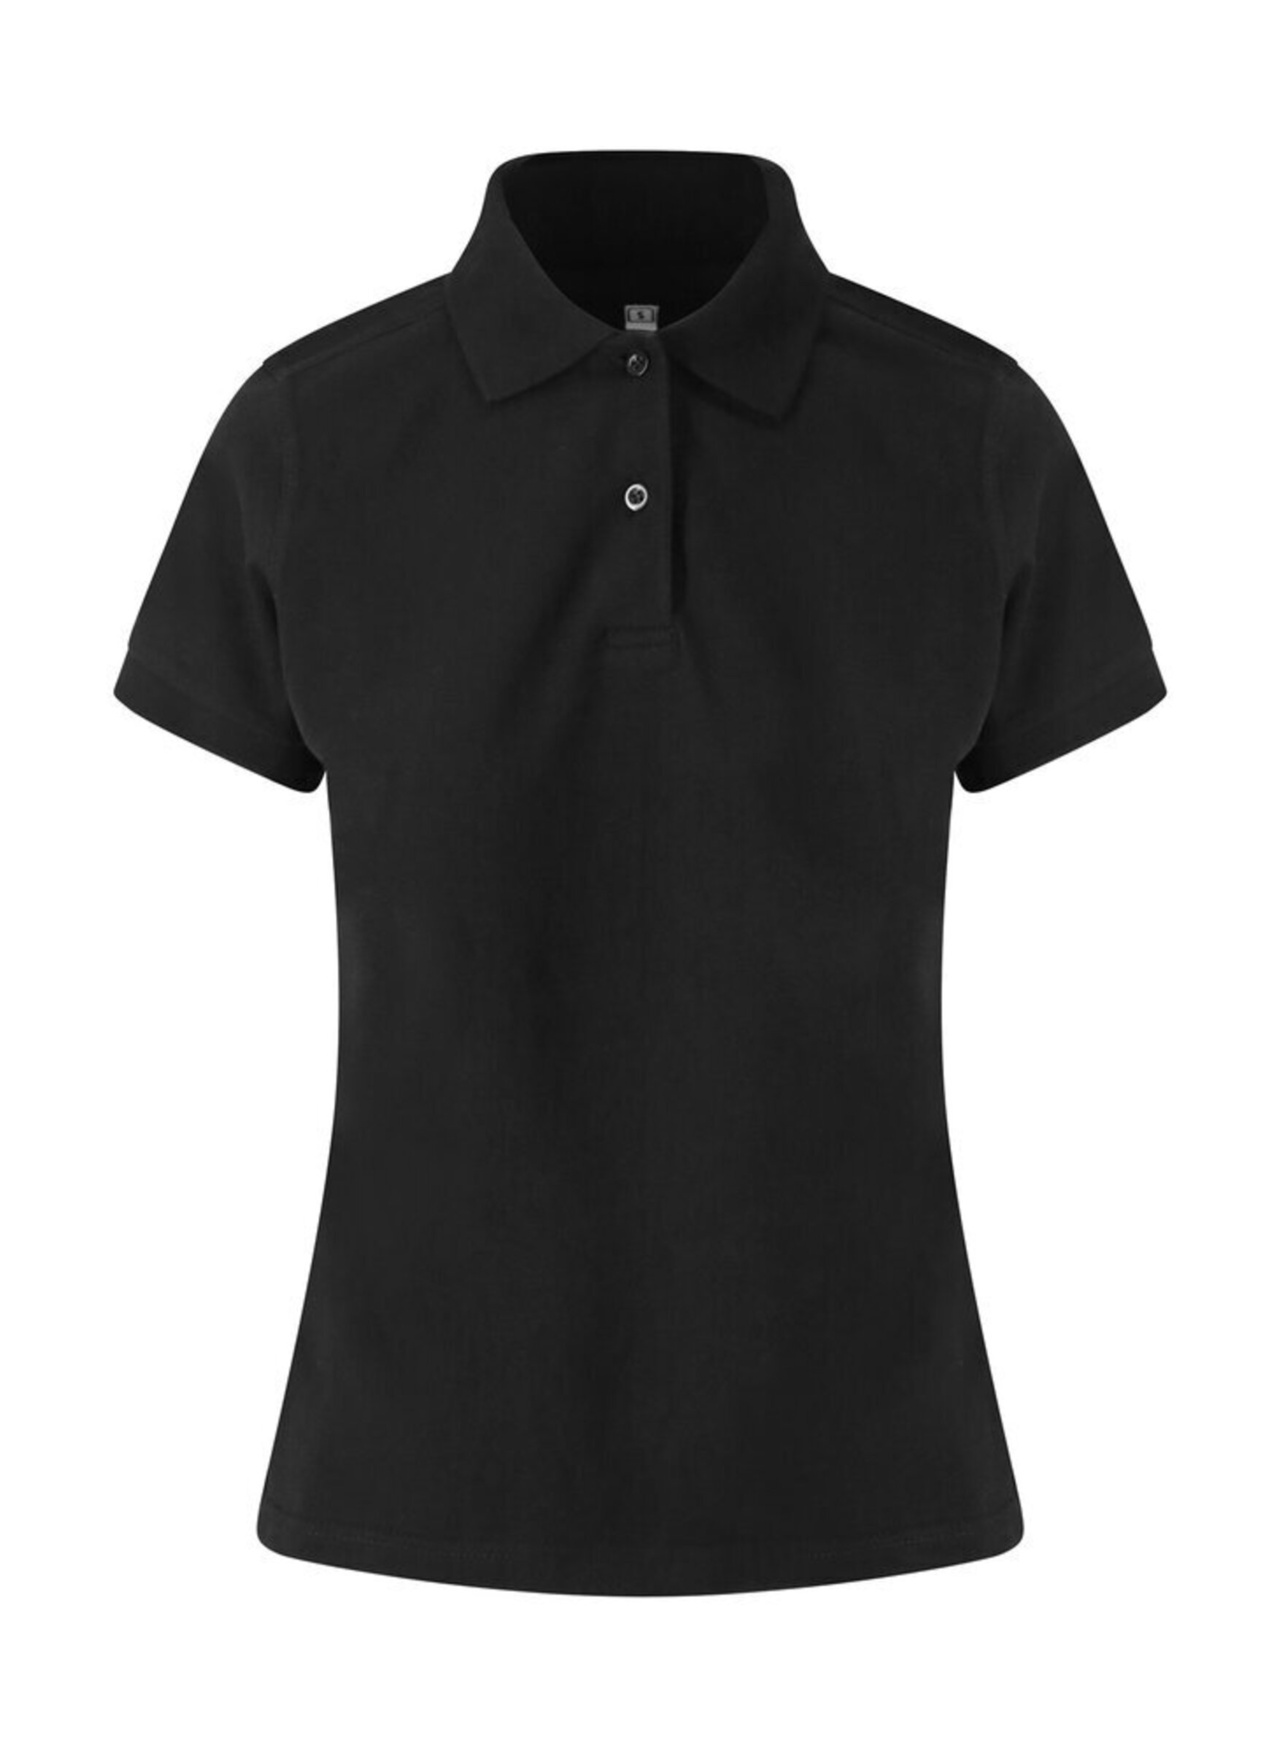 Just Polos Women's Stretch Polo - Black - XS